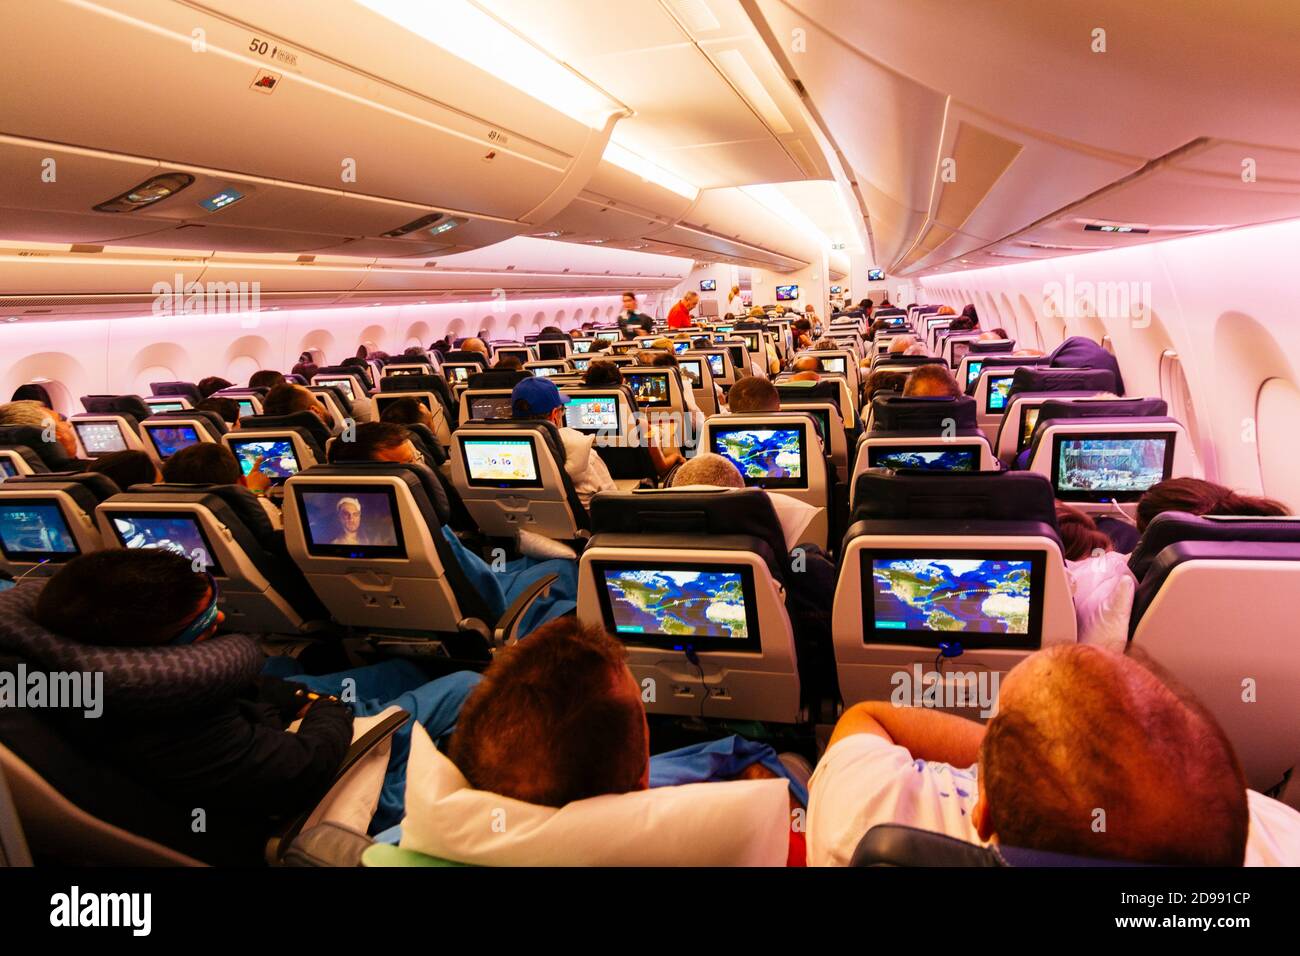 Interior Airbus A350-900. The Airbus A350 XWB is a family of long-range, twin-engine wide-body jet airliners developed by the European aerospace manuf Stock Photo